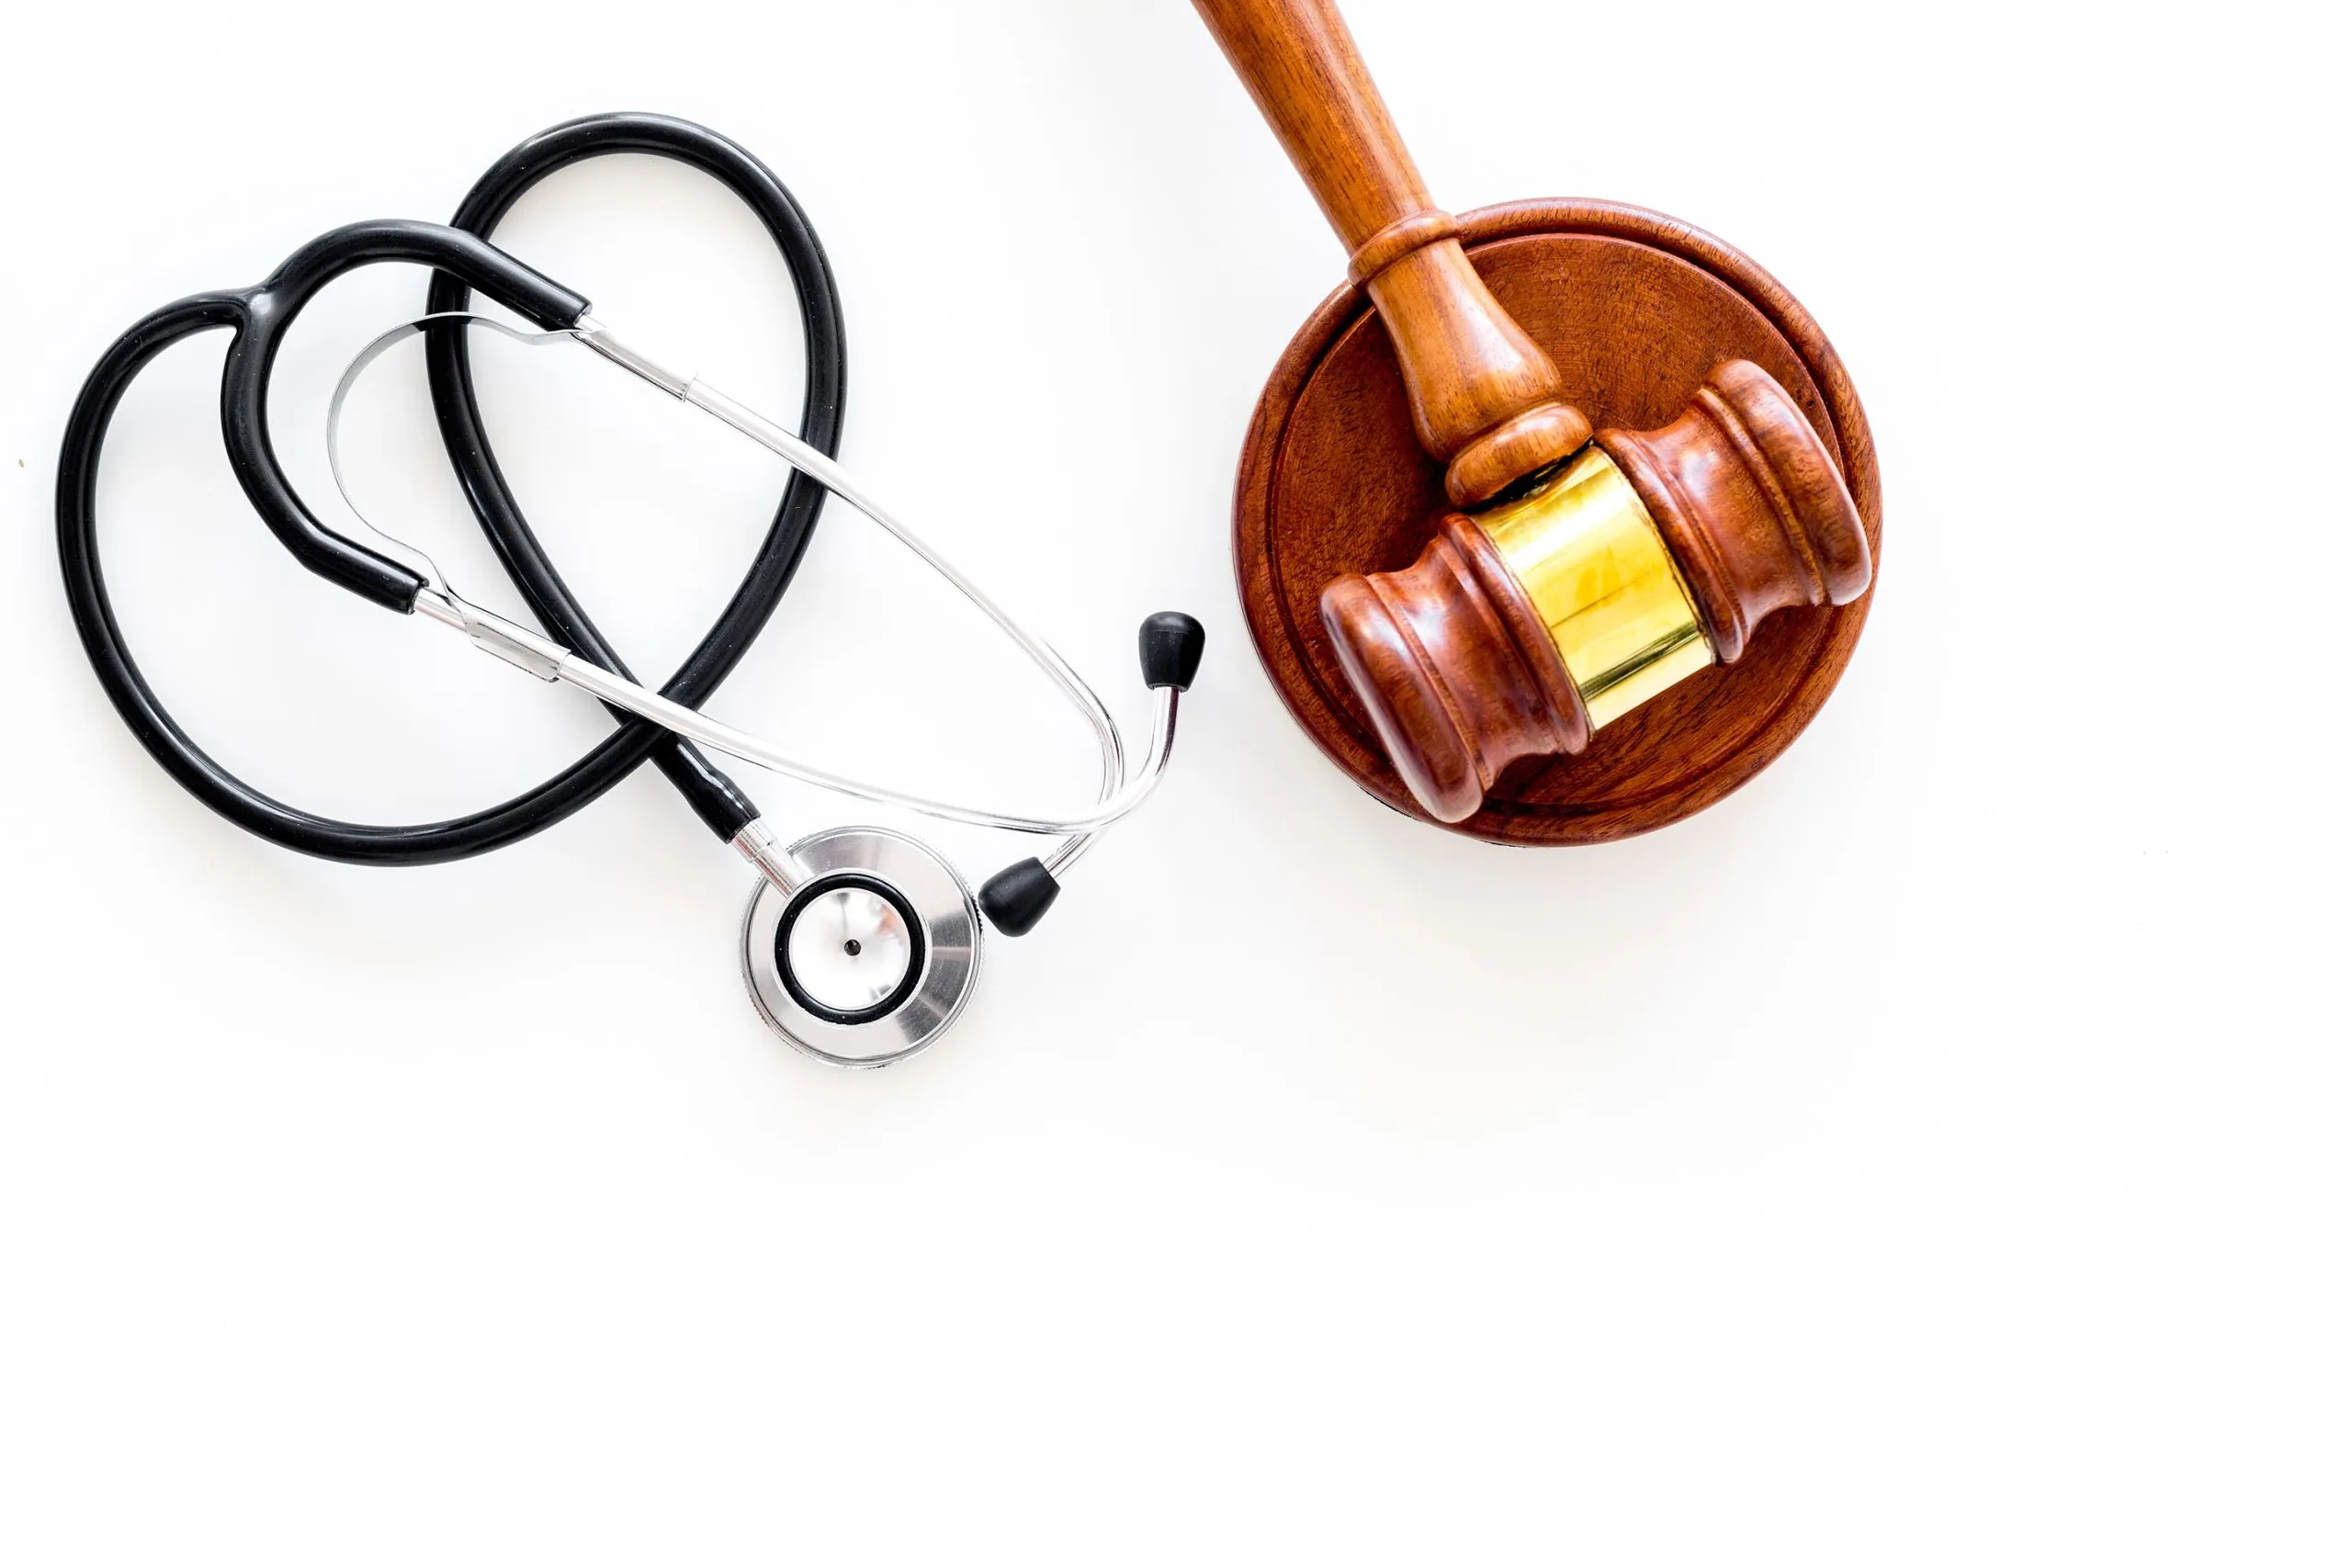 Doctor’s stethoscope and judge gavel. If you’ve sustained an injury in Kansas City, contact our personal injury lawyers today.